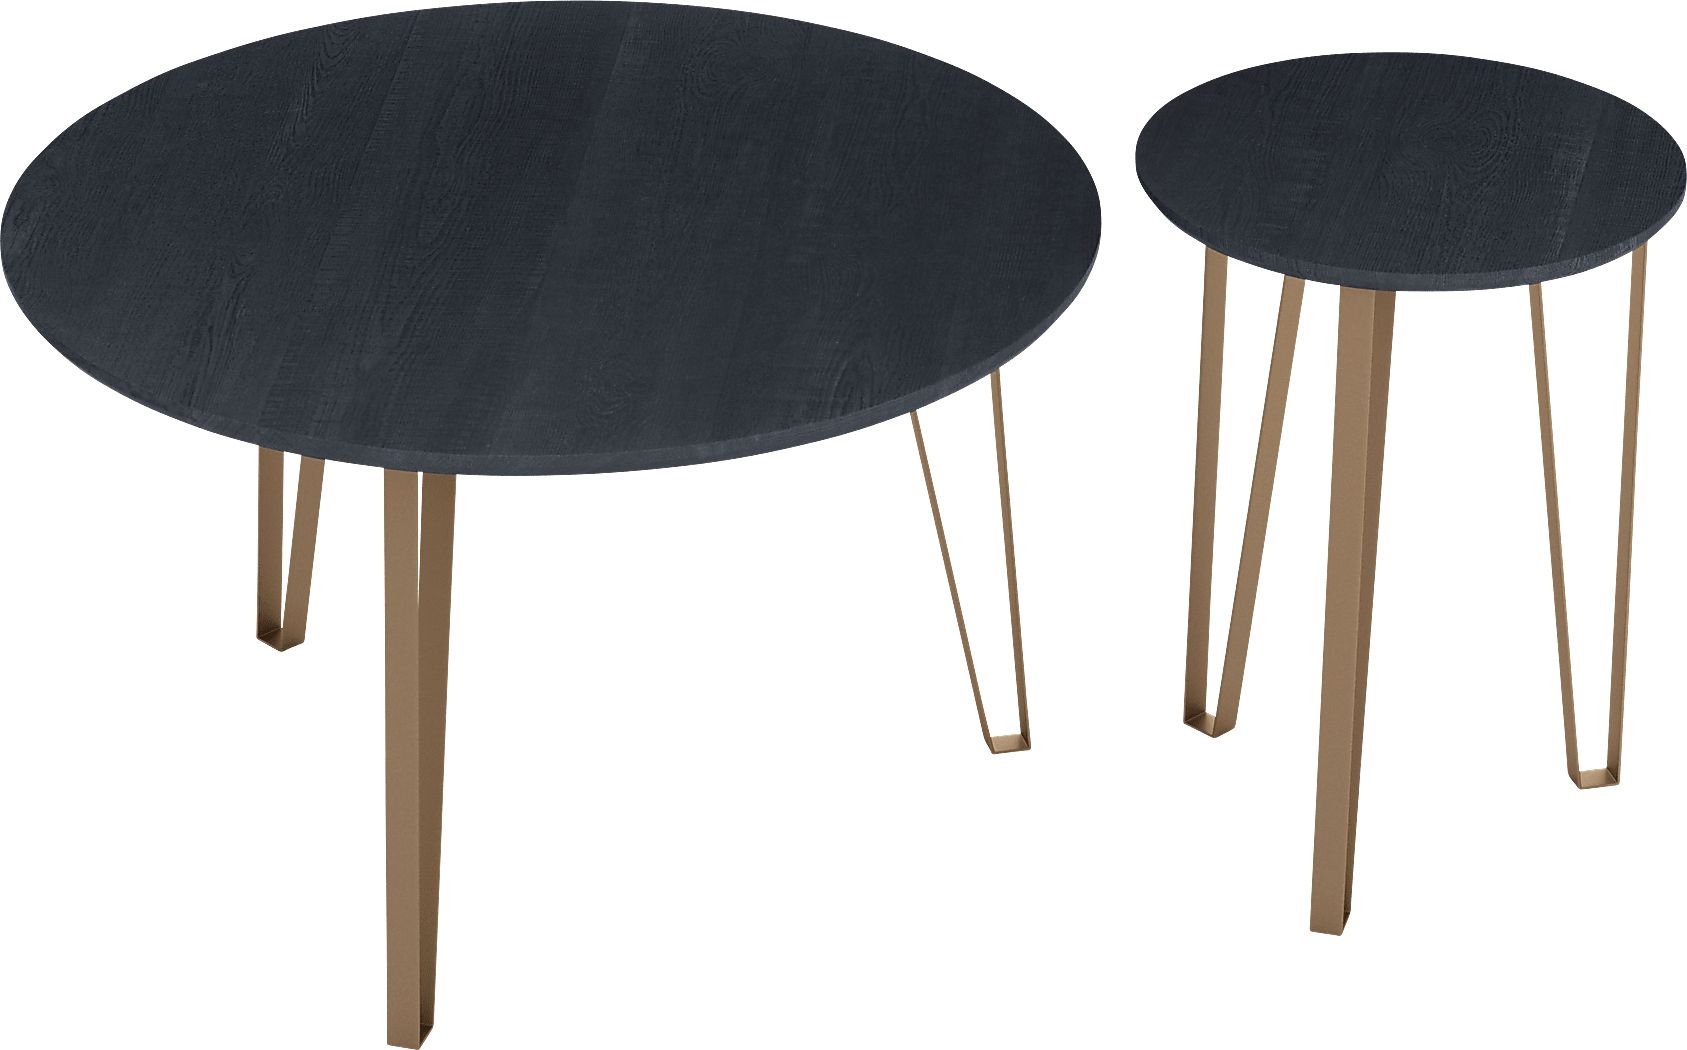 Vailmount Black Accent Table, Set of 2